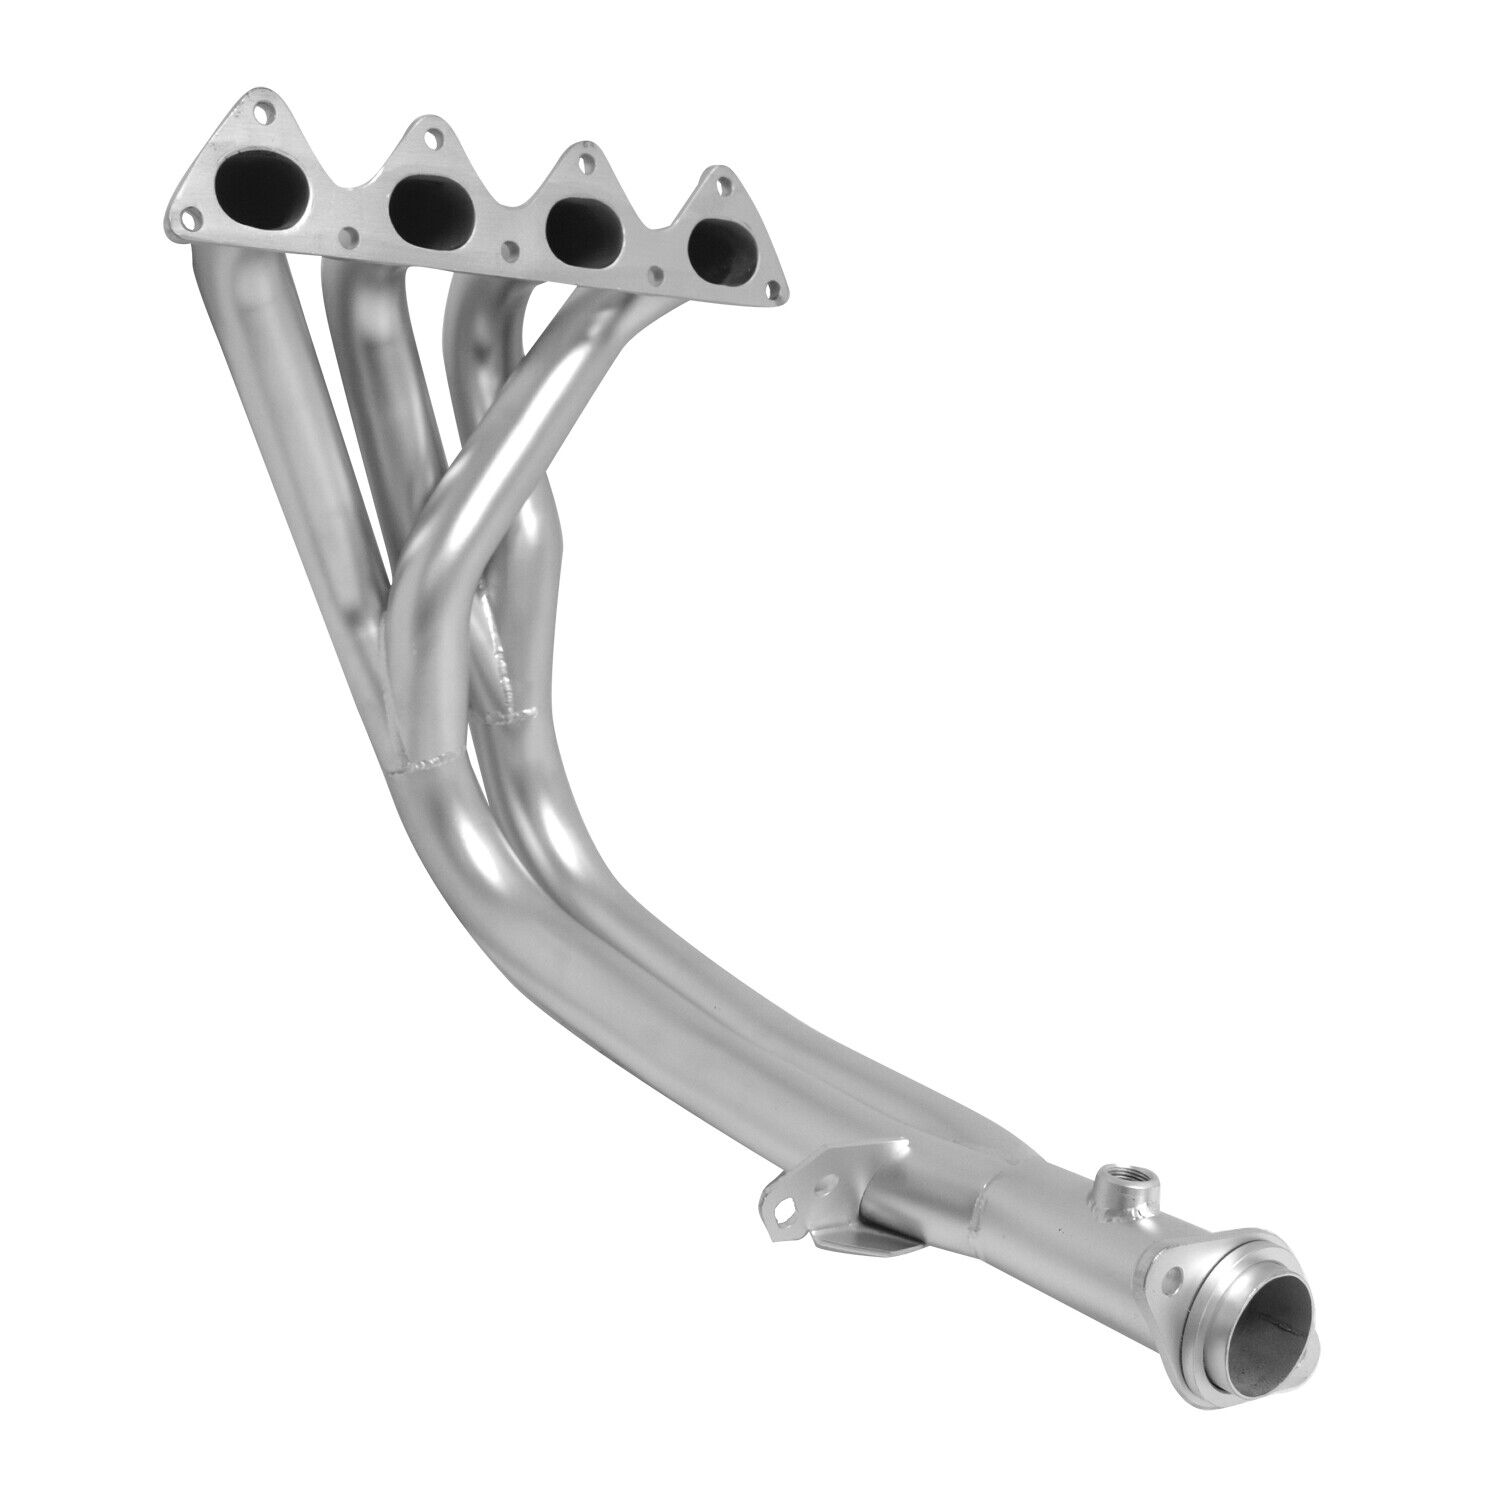 DC Sports Ceramic 4-2-1 Exhaust Header for 99-00 Civic Si DOHC B16 (Carb Legal)